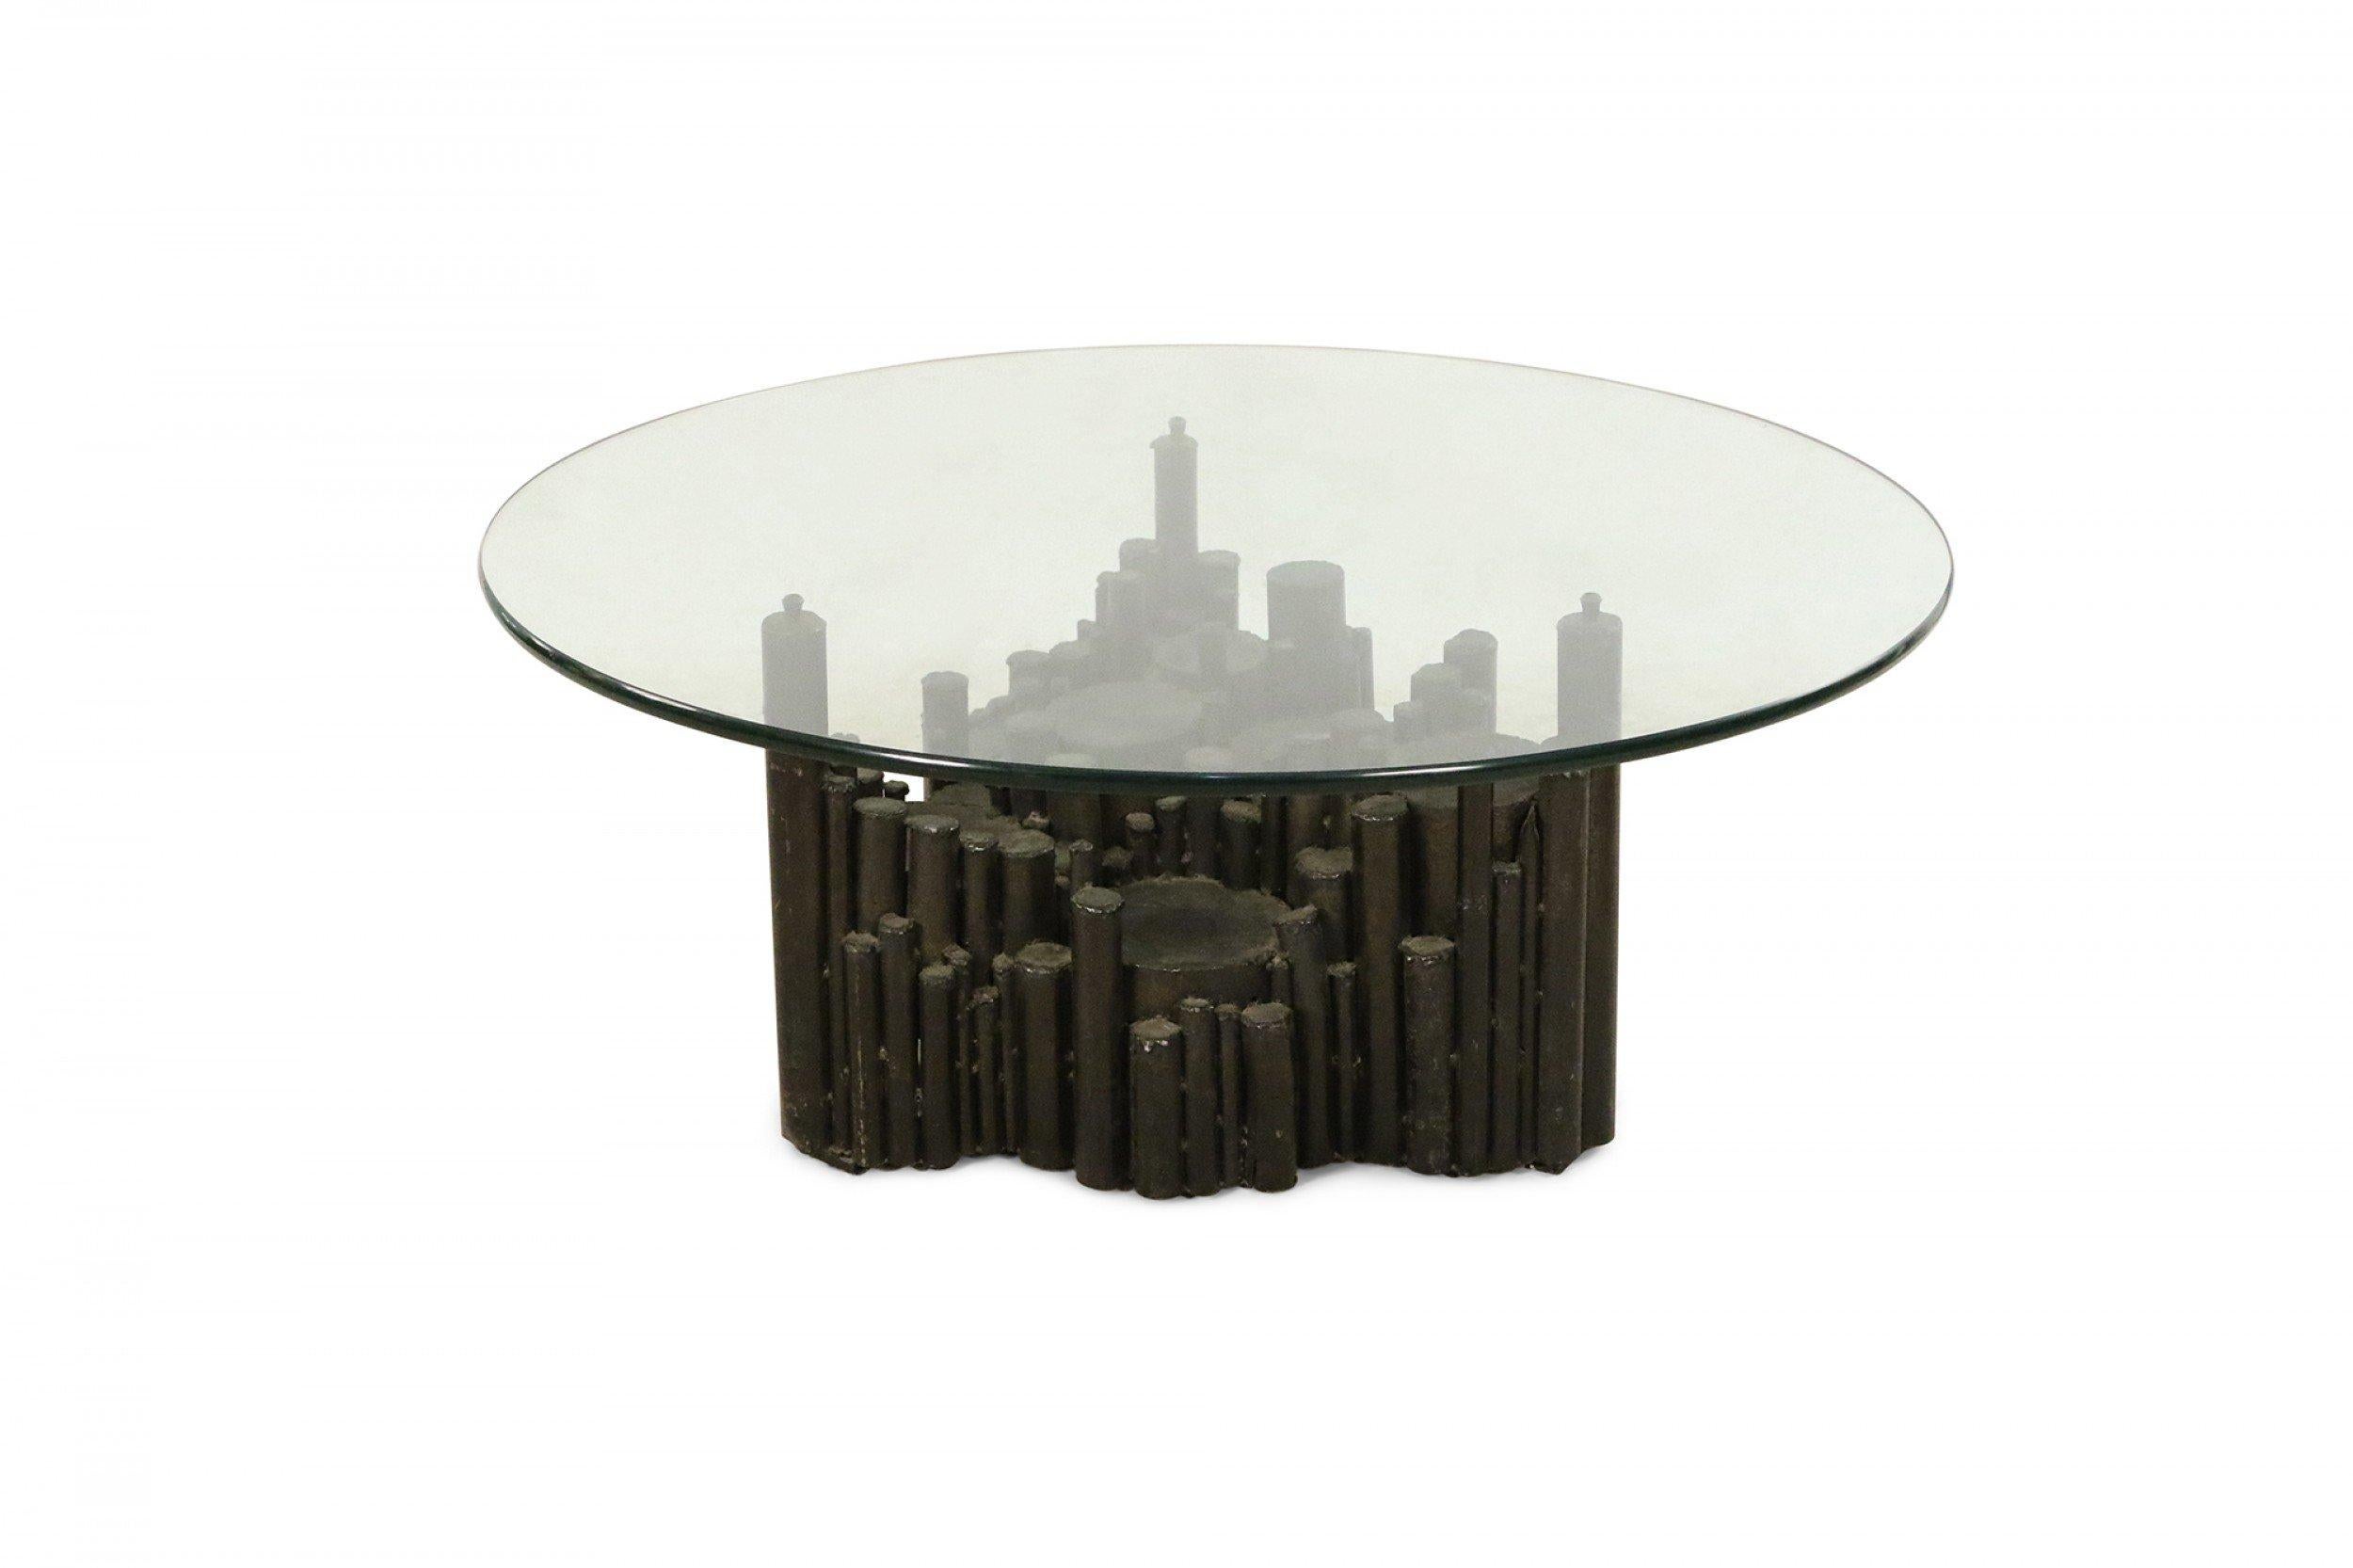 20th Century Brutalist Glass and Metal Rod Coffee Table 'Manner of Paul Evans'